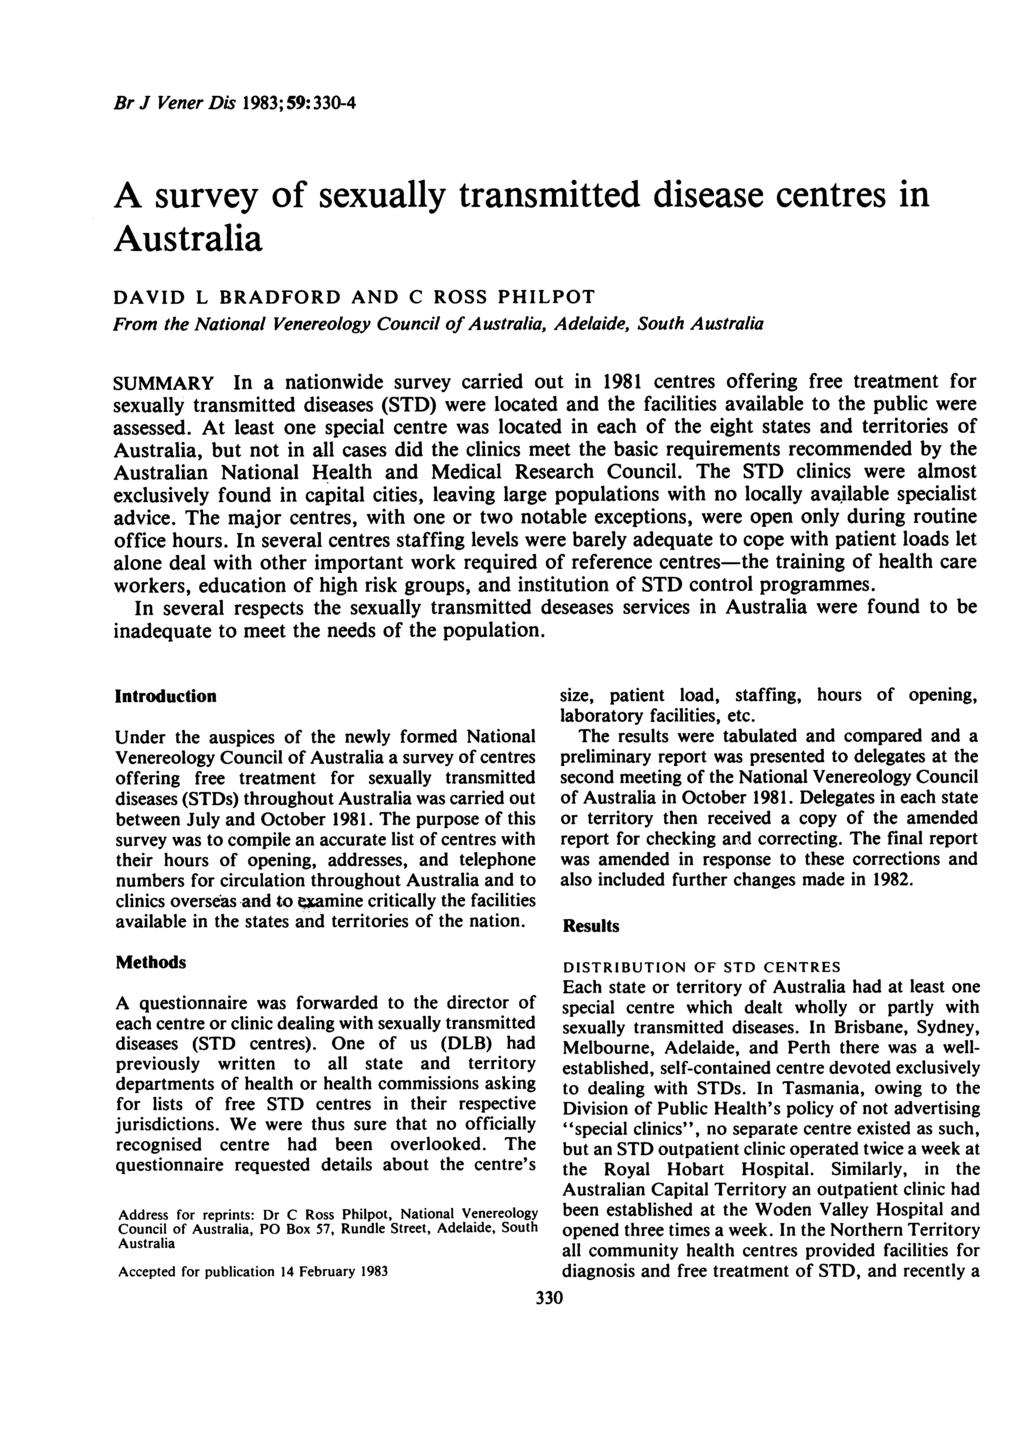 BrJ VenerDis 1983;59:330-4 A survey of sexually transmitted disease centres in Australia DAVID L BRADFORD AND C ROSS PHILPOT From the National Venereology Council of Australia, Adelaide, South